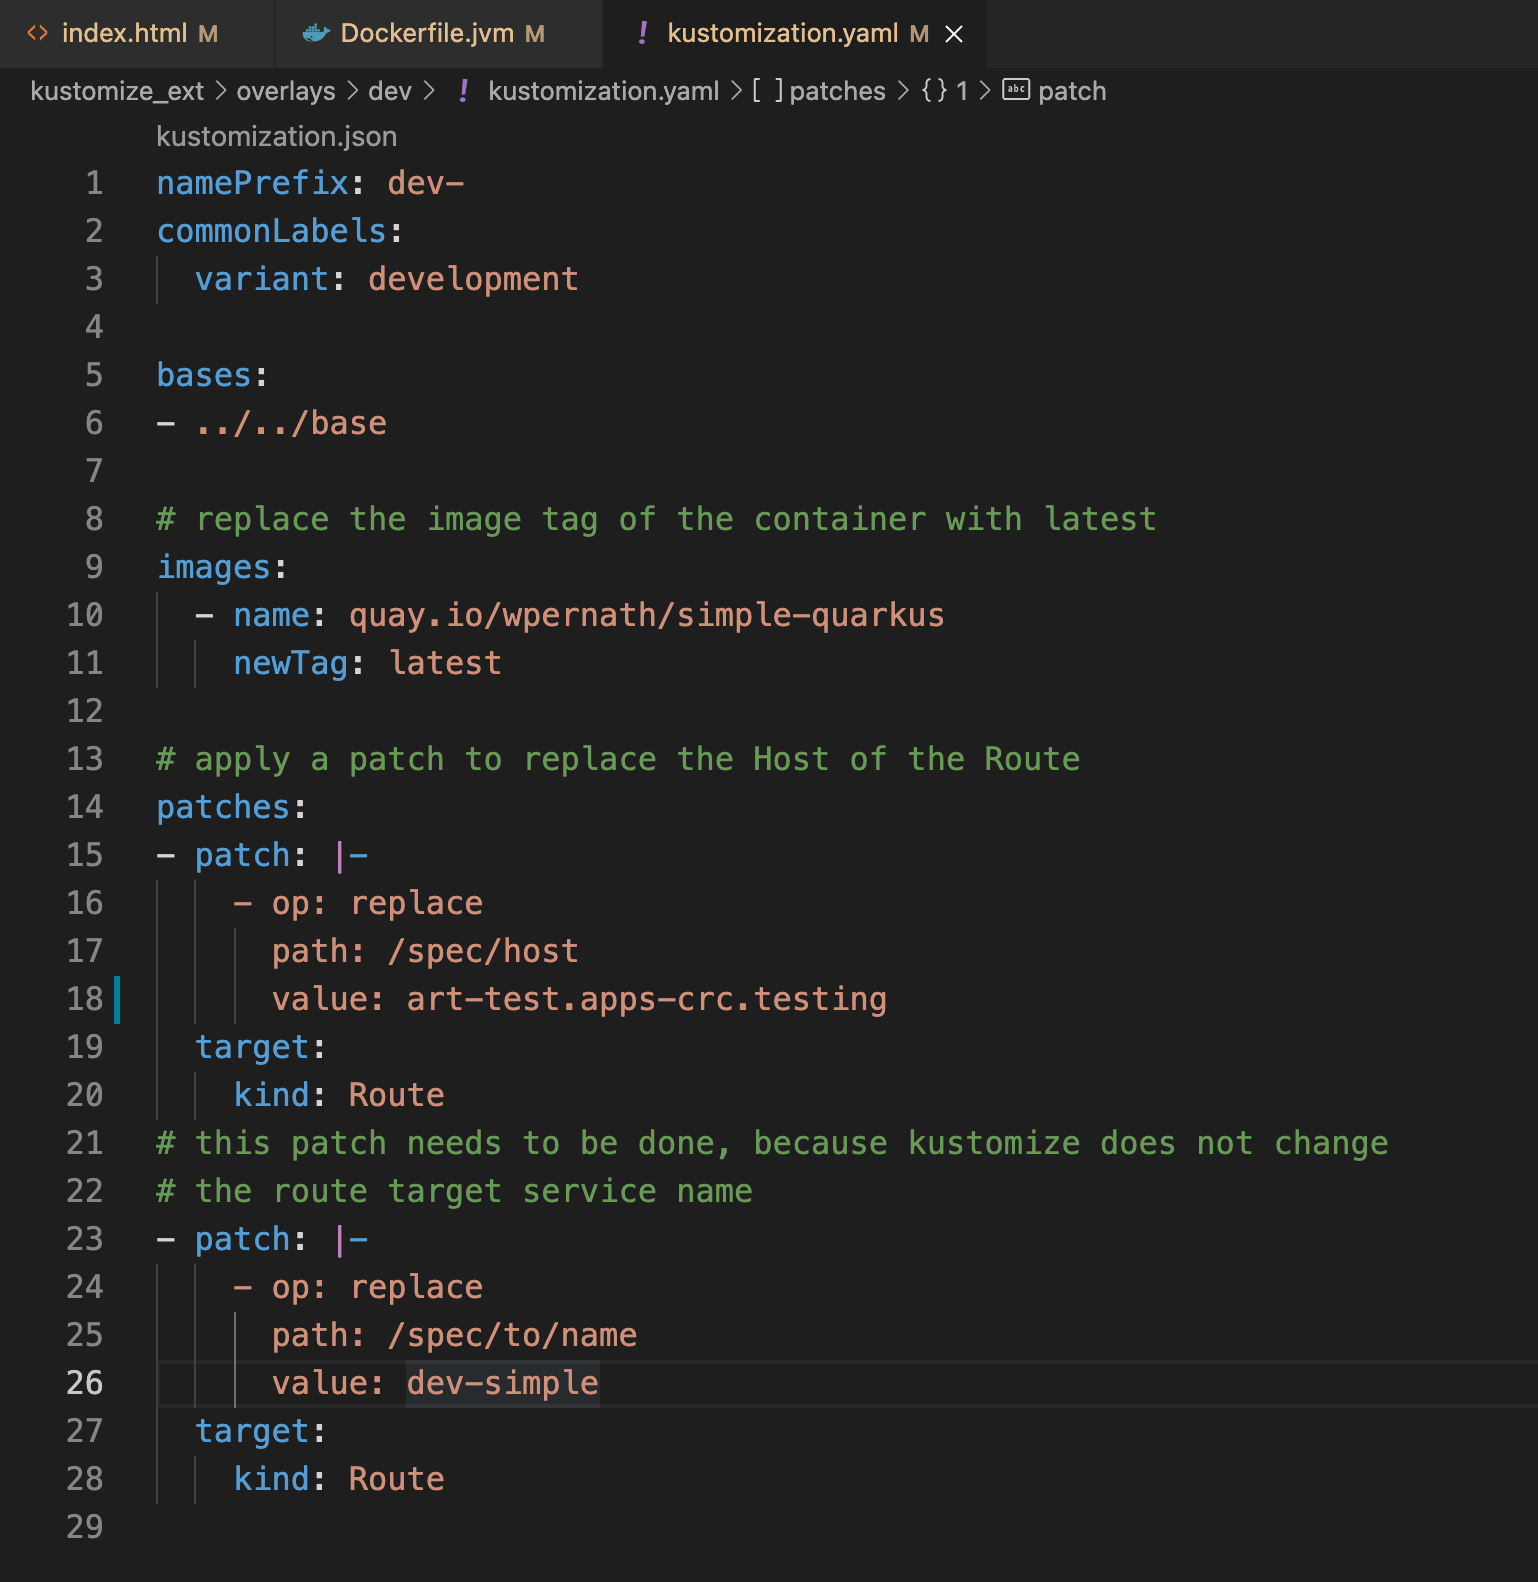 Image 2: Kustomize.yaml for use in our example